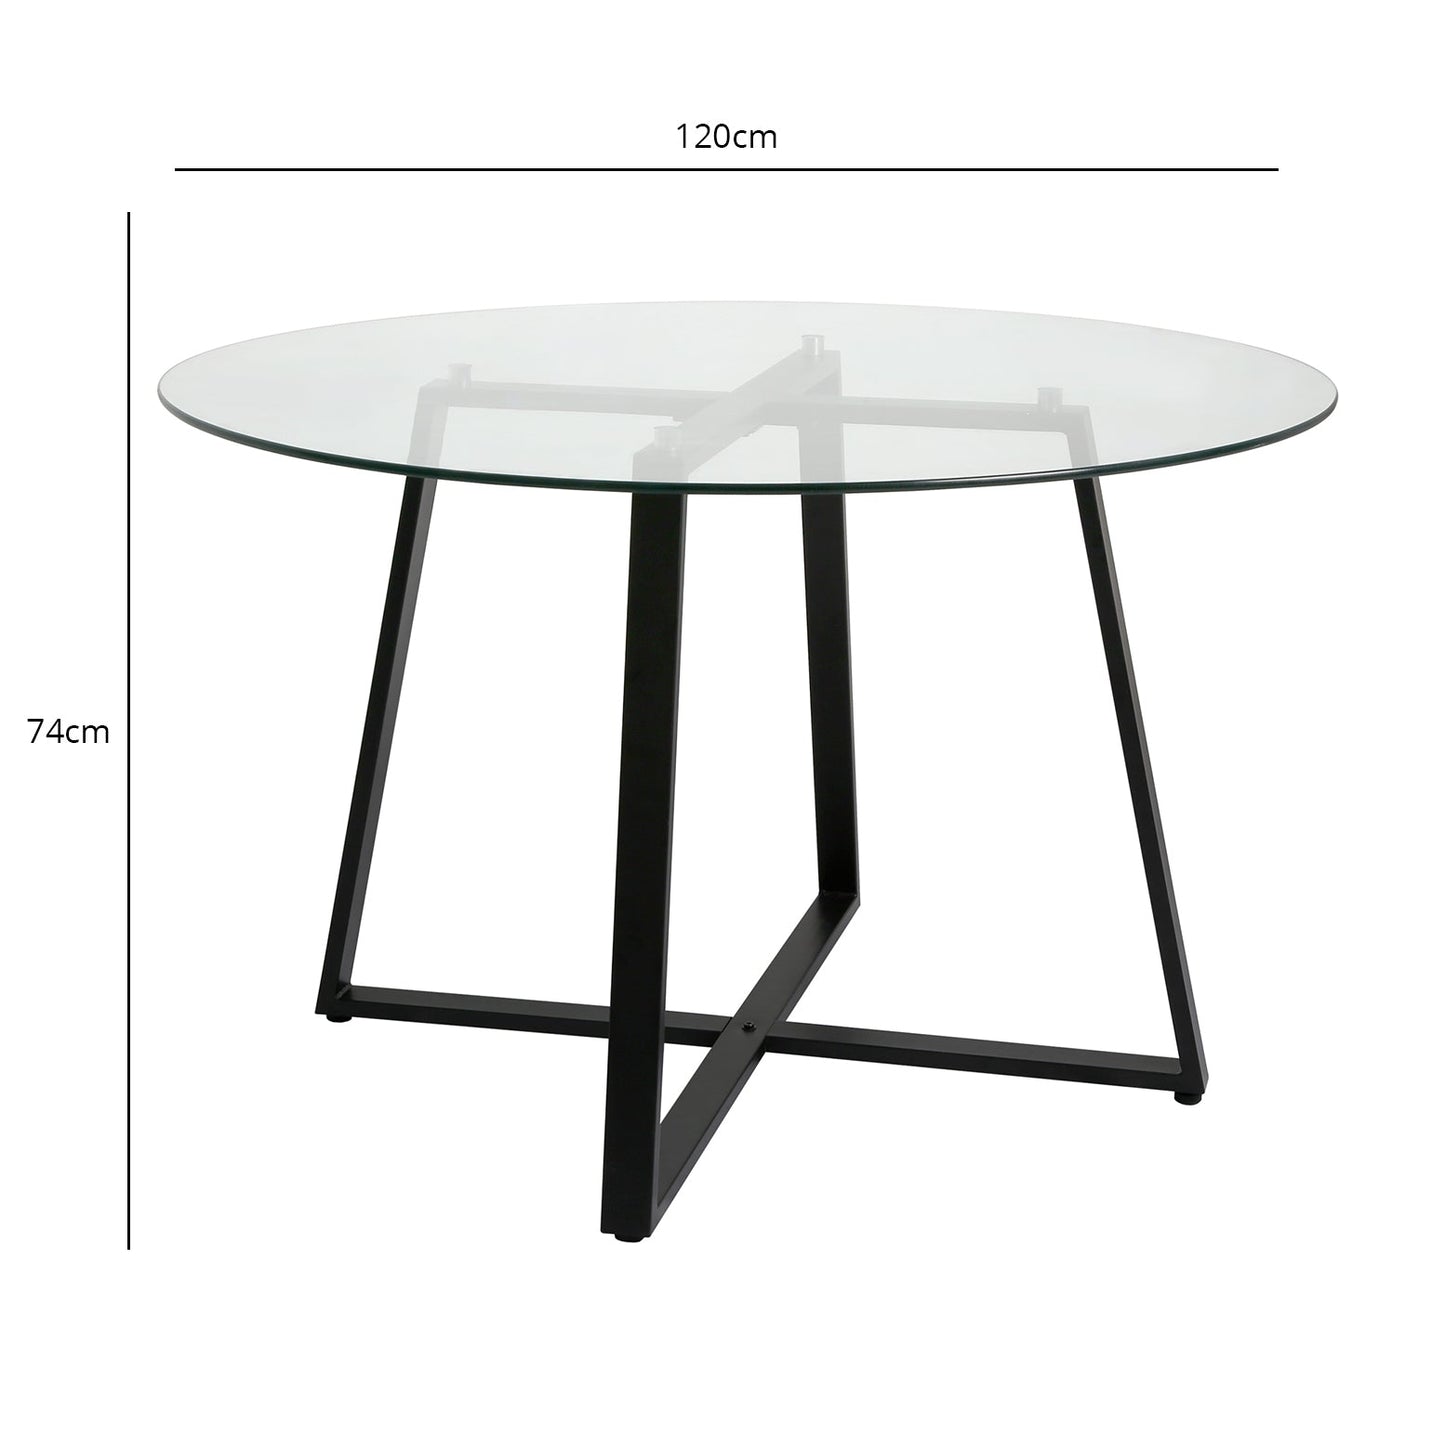 Clara glass round dining table - with black frame